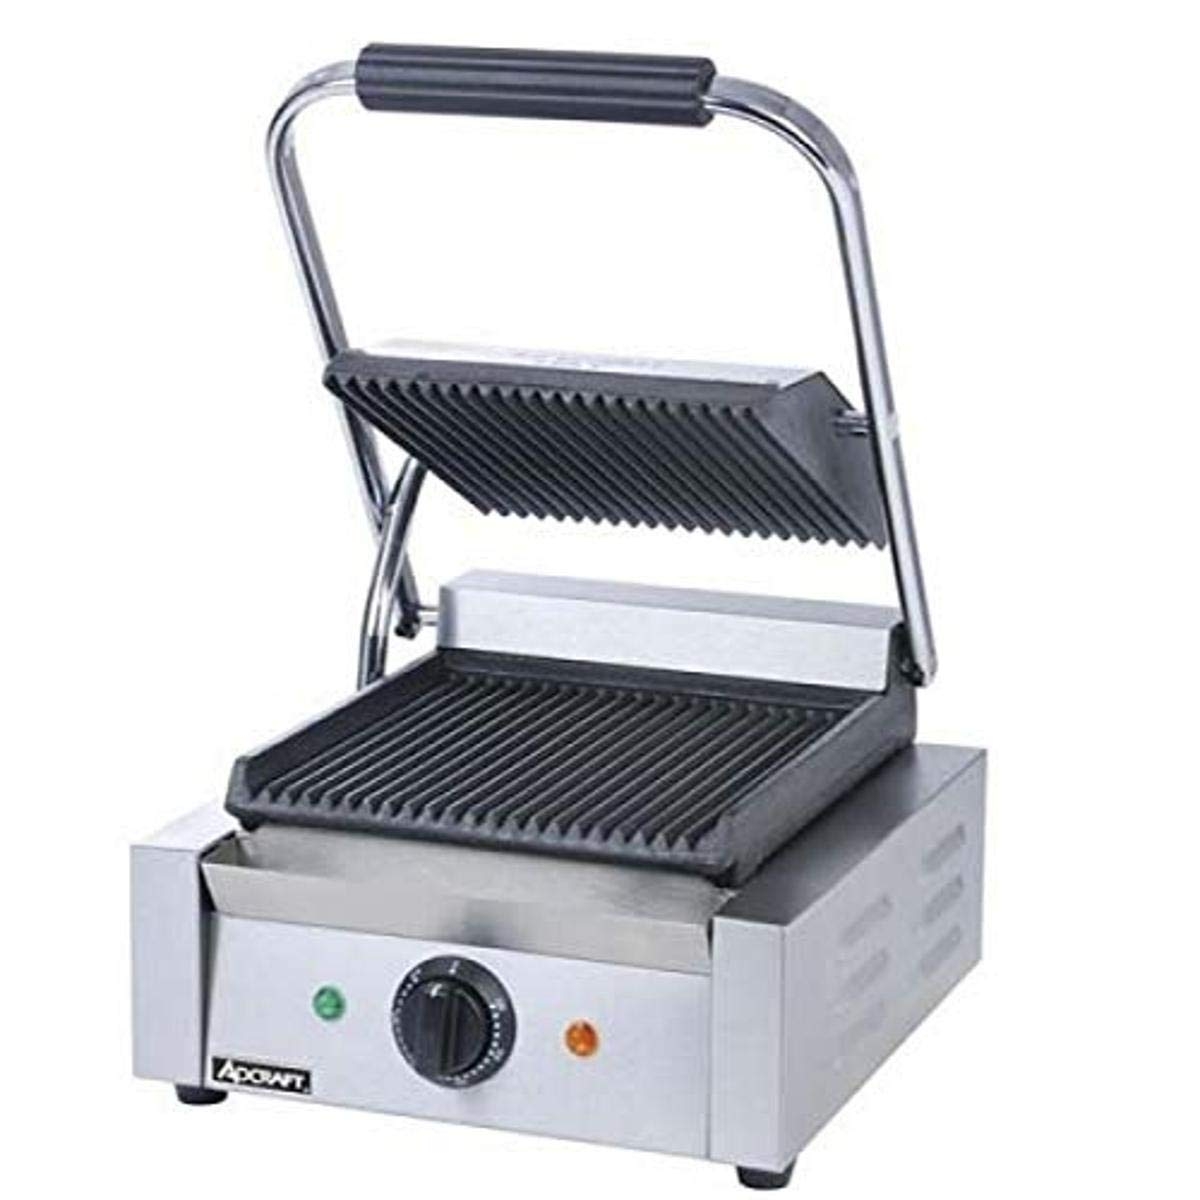 Adcraft SG-811 Grooved Electric Sandwich Grill, Panini Press with Cast Iron Grooved Plates Stainless Steel, 1750-Watts, 120v,